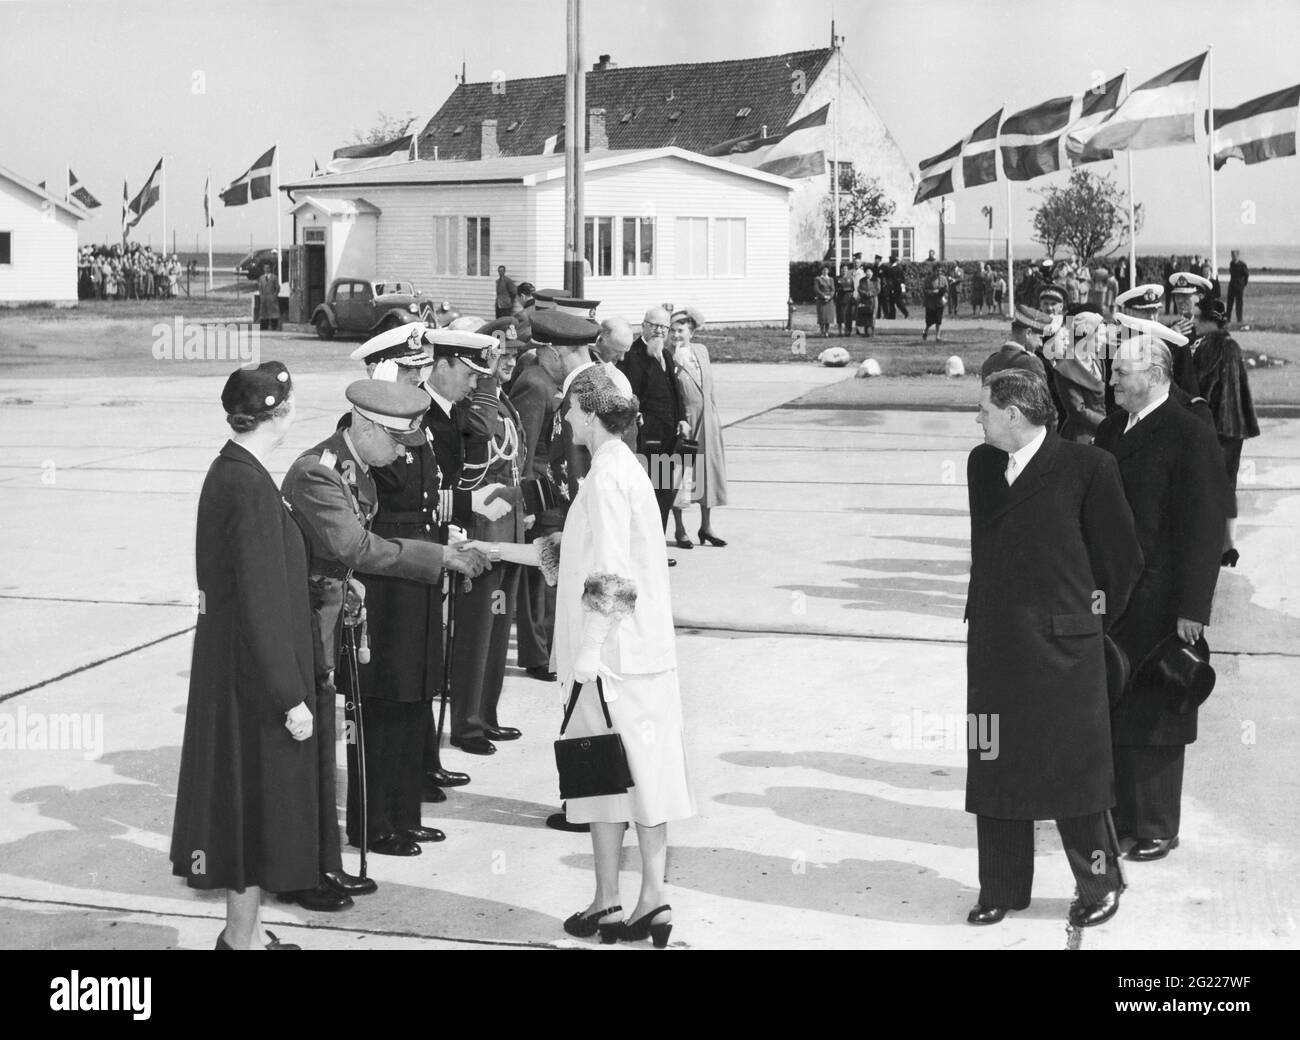 Ingrid of Sweden, 28.3.1910 - 7.11.2000, Queen Consort of Denmark 1947 - 1972, scene, ADDITIONAL-RIGHTS-CLEARANCE-INFO-NOT-AVAILABLE Stock Photo